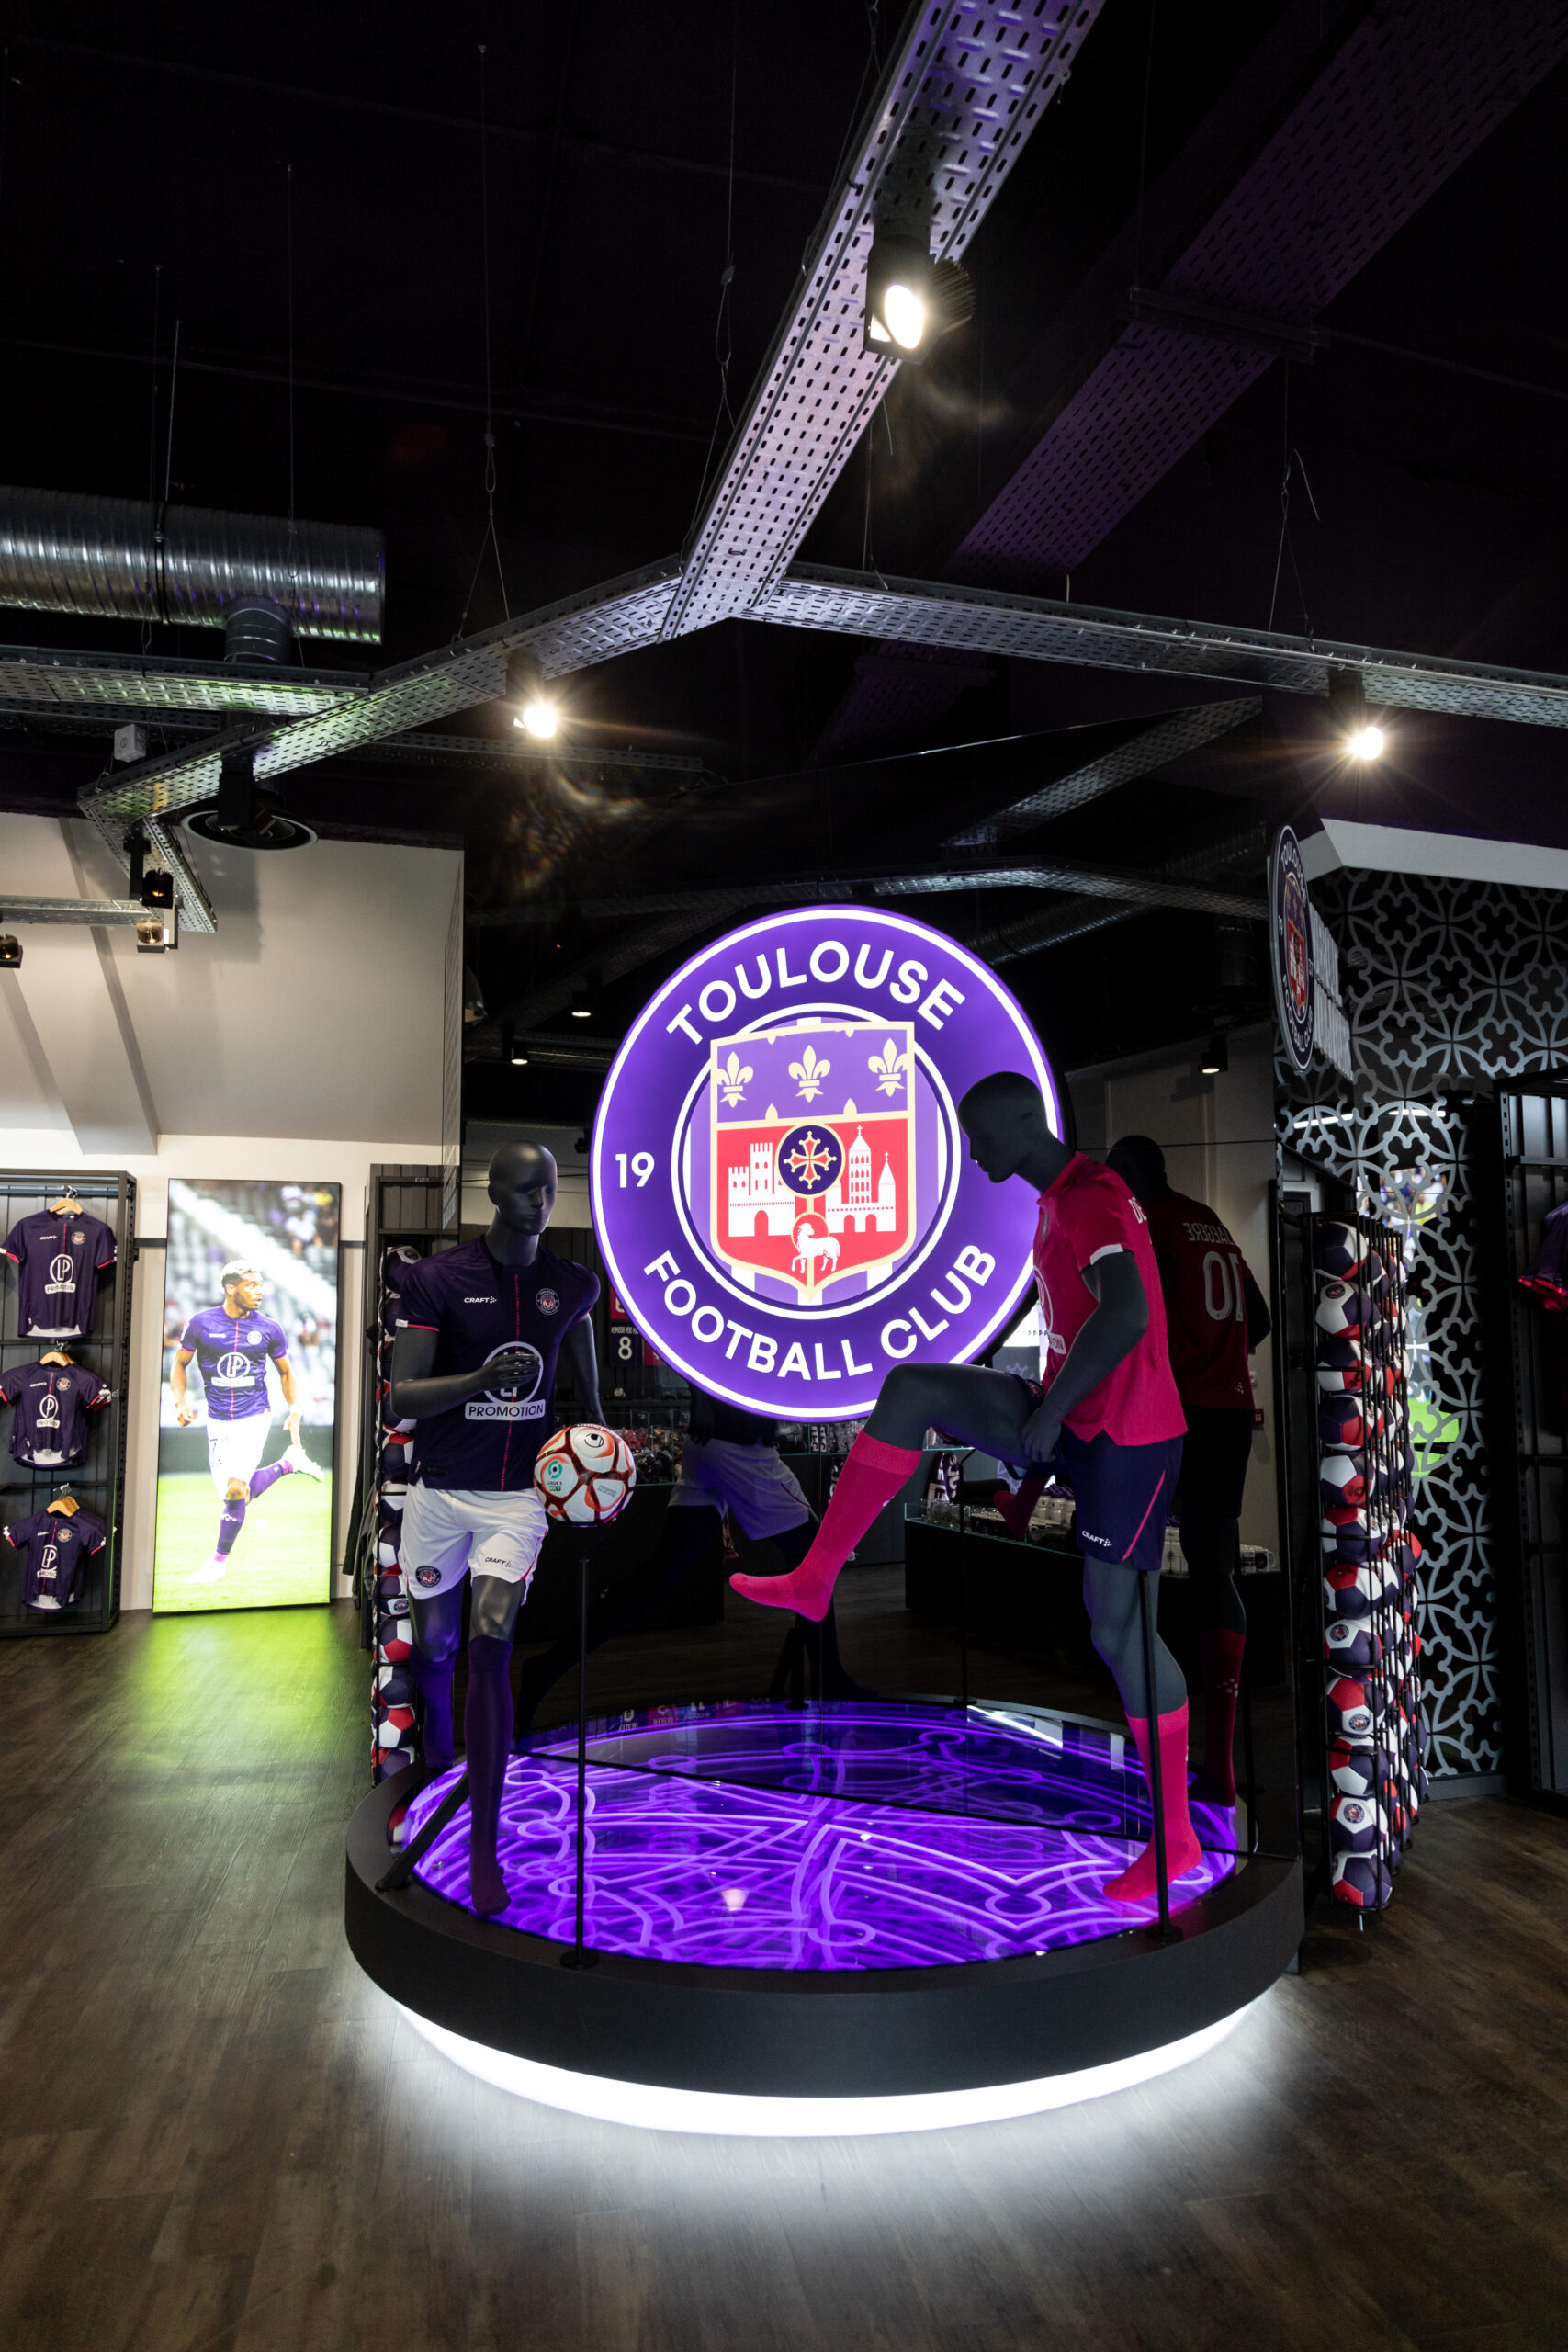 Rizlly – French club Toulouse Football Club (6)